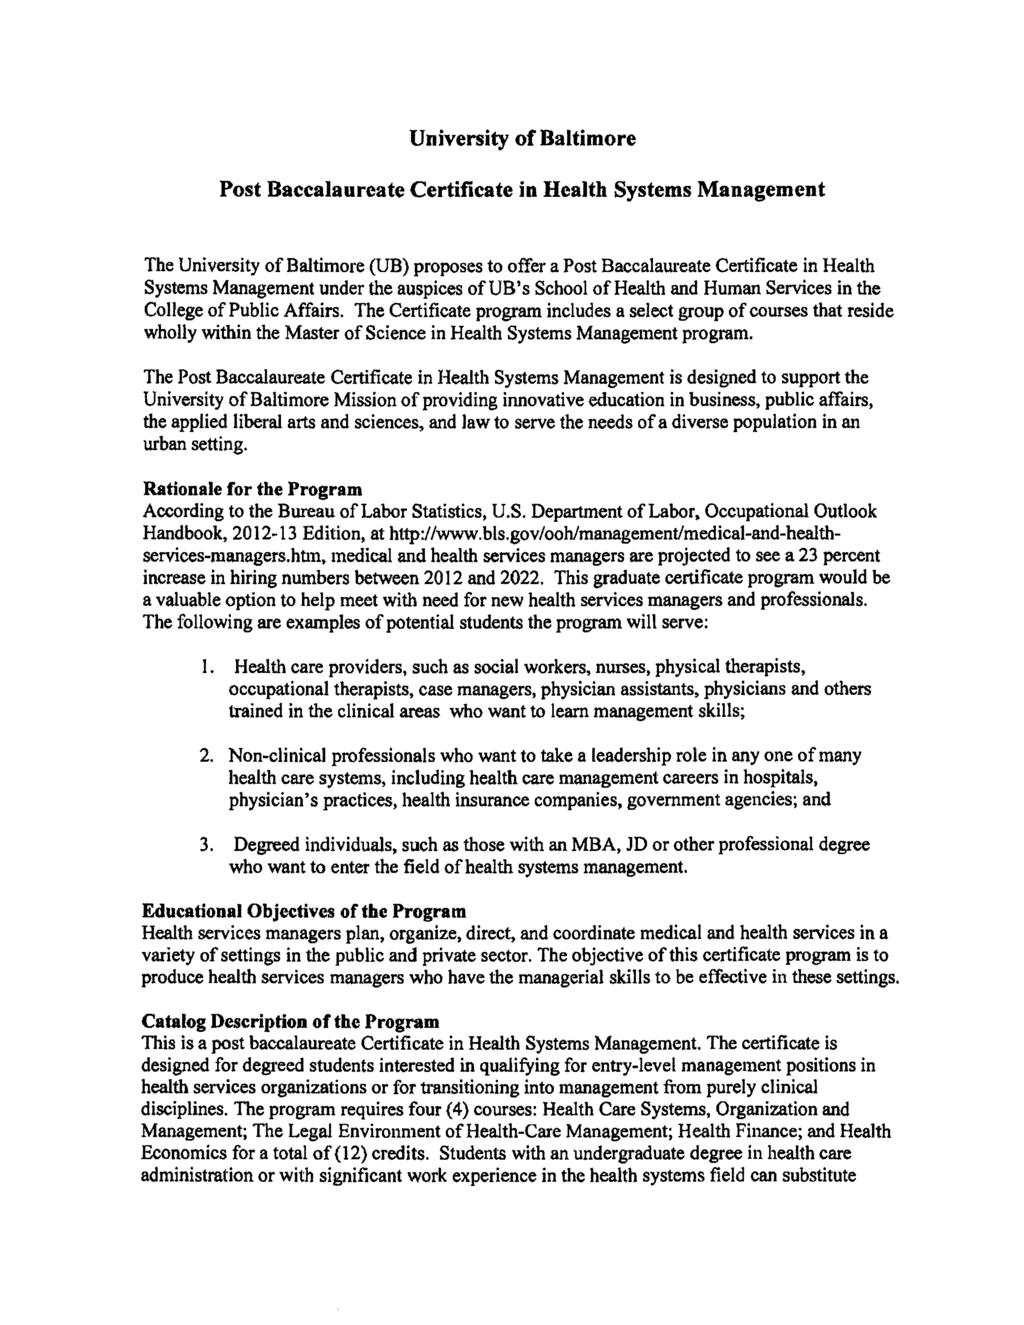 University of Baltimore Post Baccalaureate Certificate in Health Systems Management The University of Baltimore (UB) proposes to offer a Post Baccalaureate Certificate in Health Systems Management